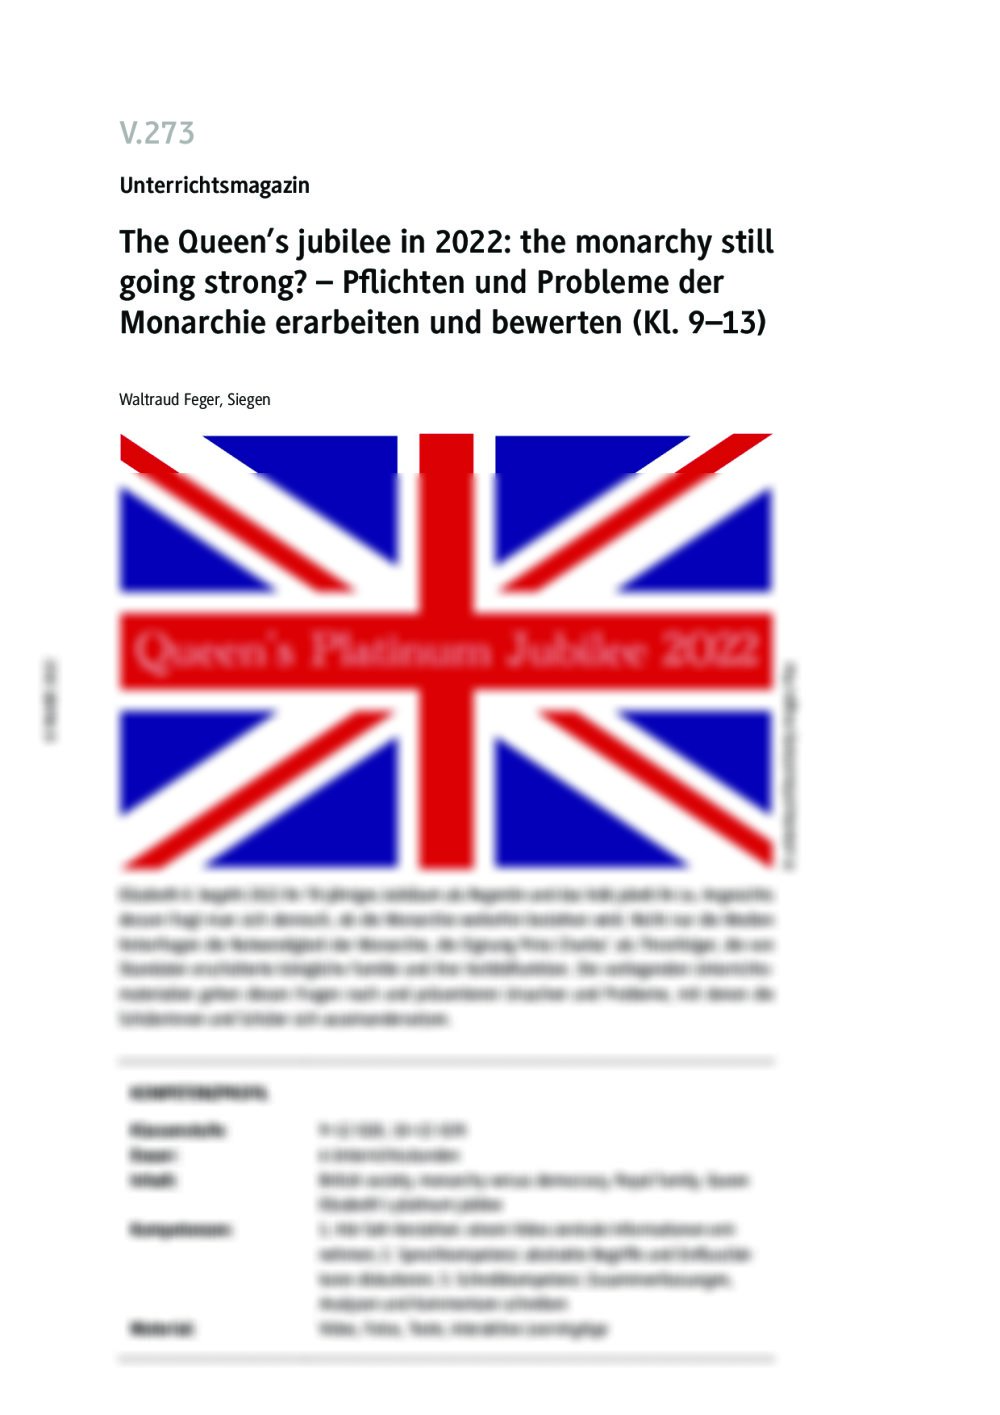 The Queen's jubilee in 2022: the monarchy still going strong? - Seite 1